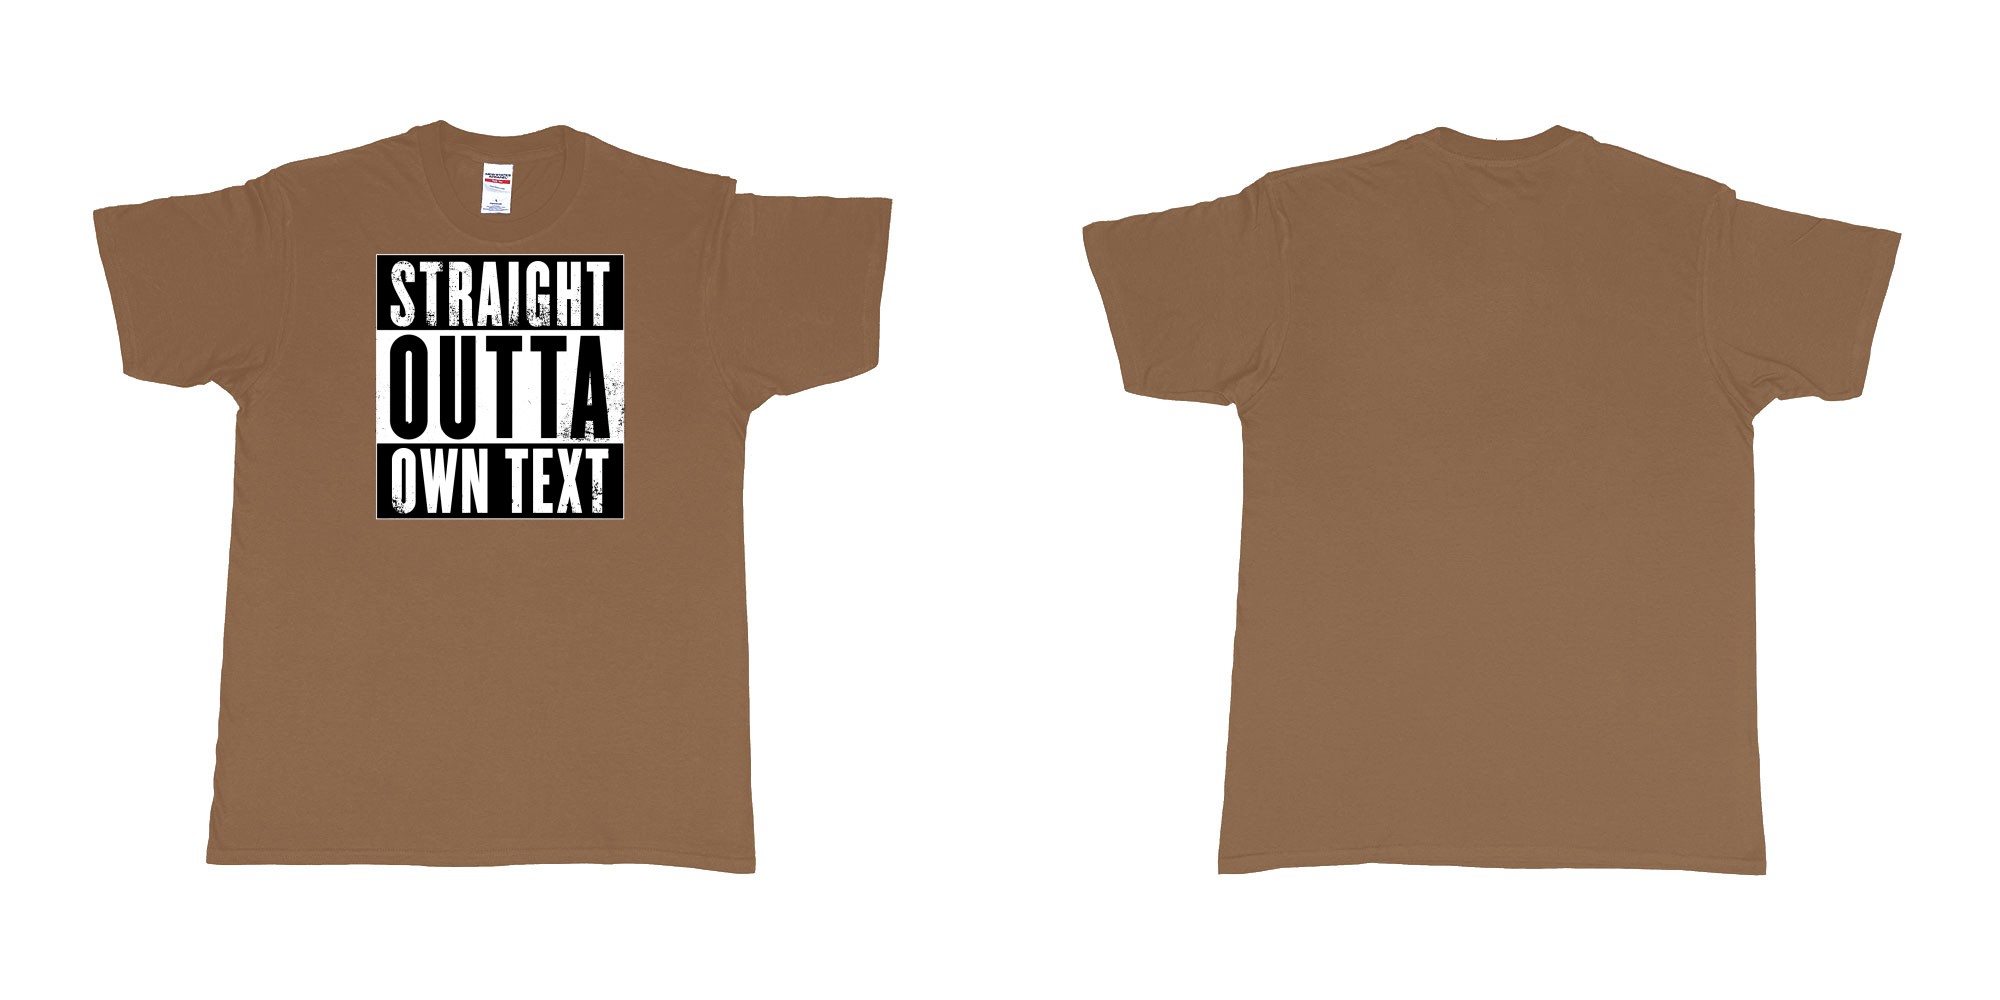 Custom tshirt design Straight Outta Compton in fabric color chestnut choice your own text made in Bali by The Pirate Way